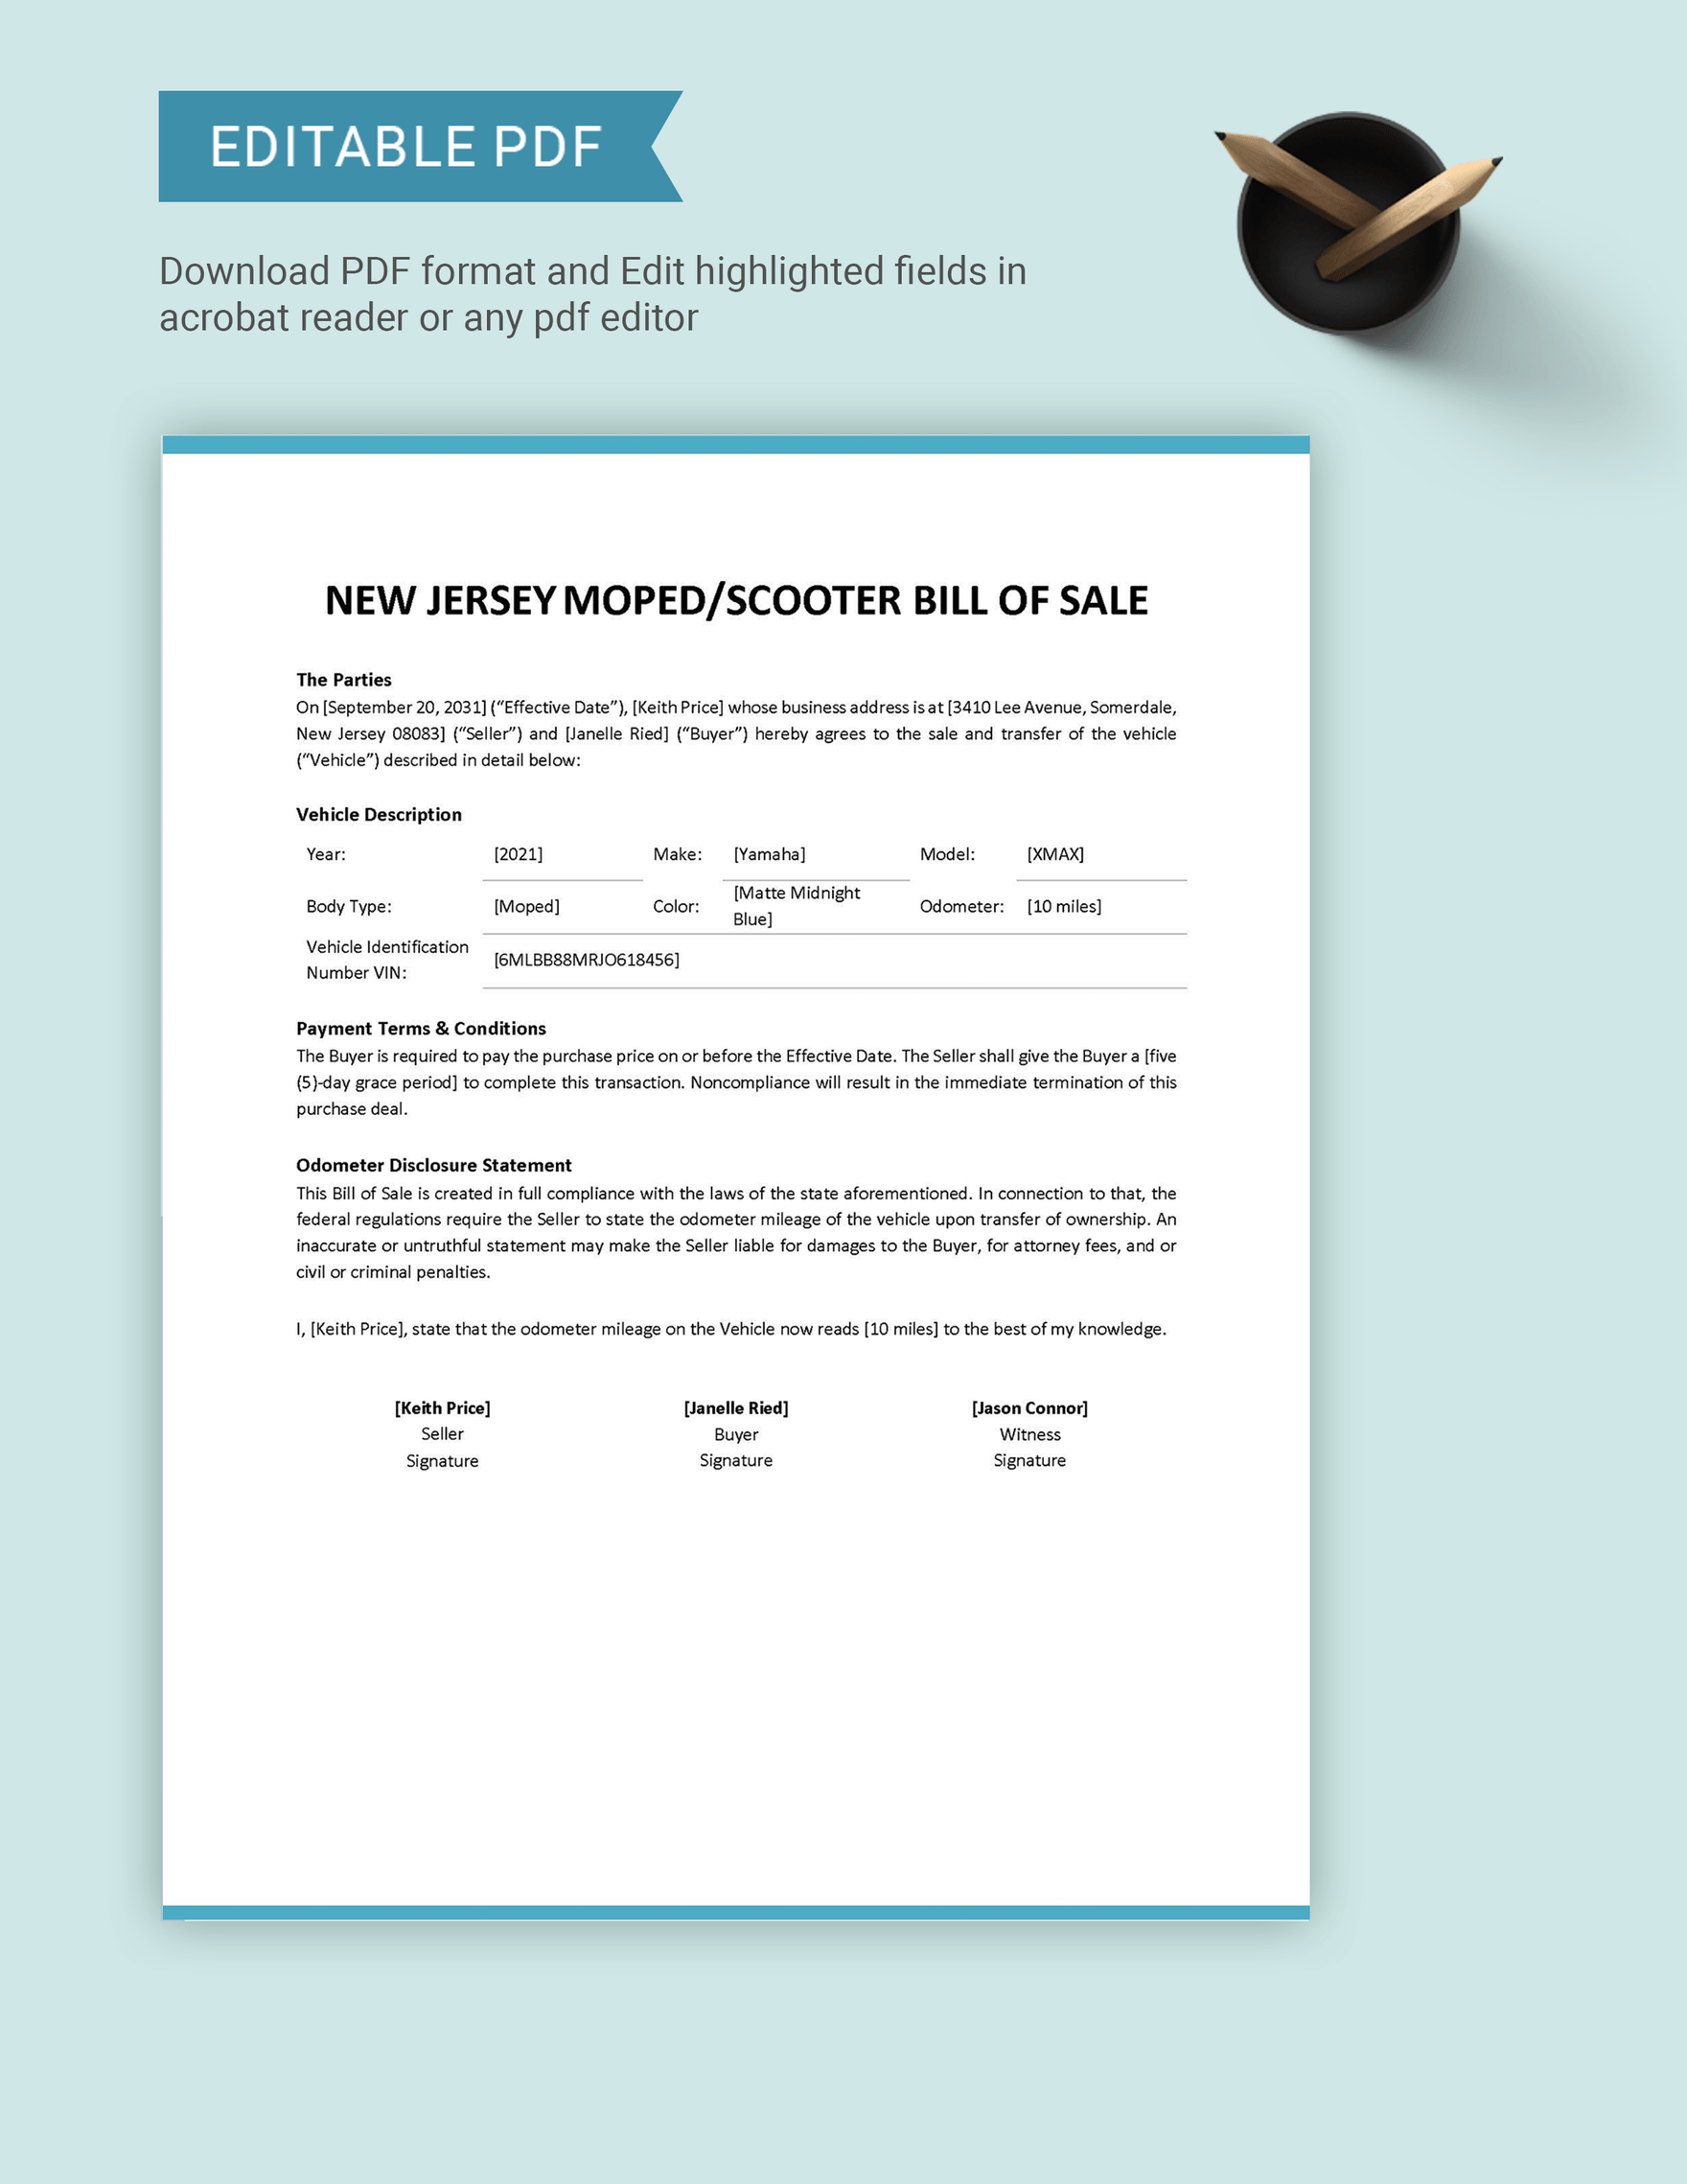 New Jersey Moped / Scooter Bill of Sale Template